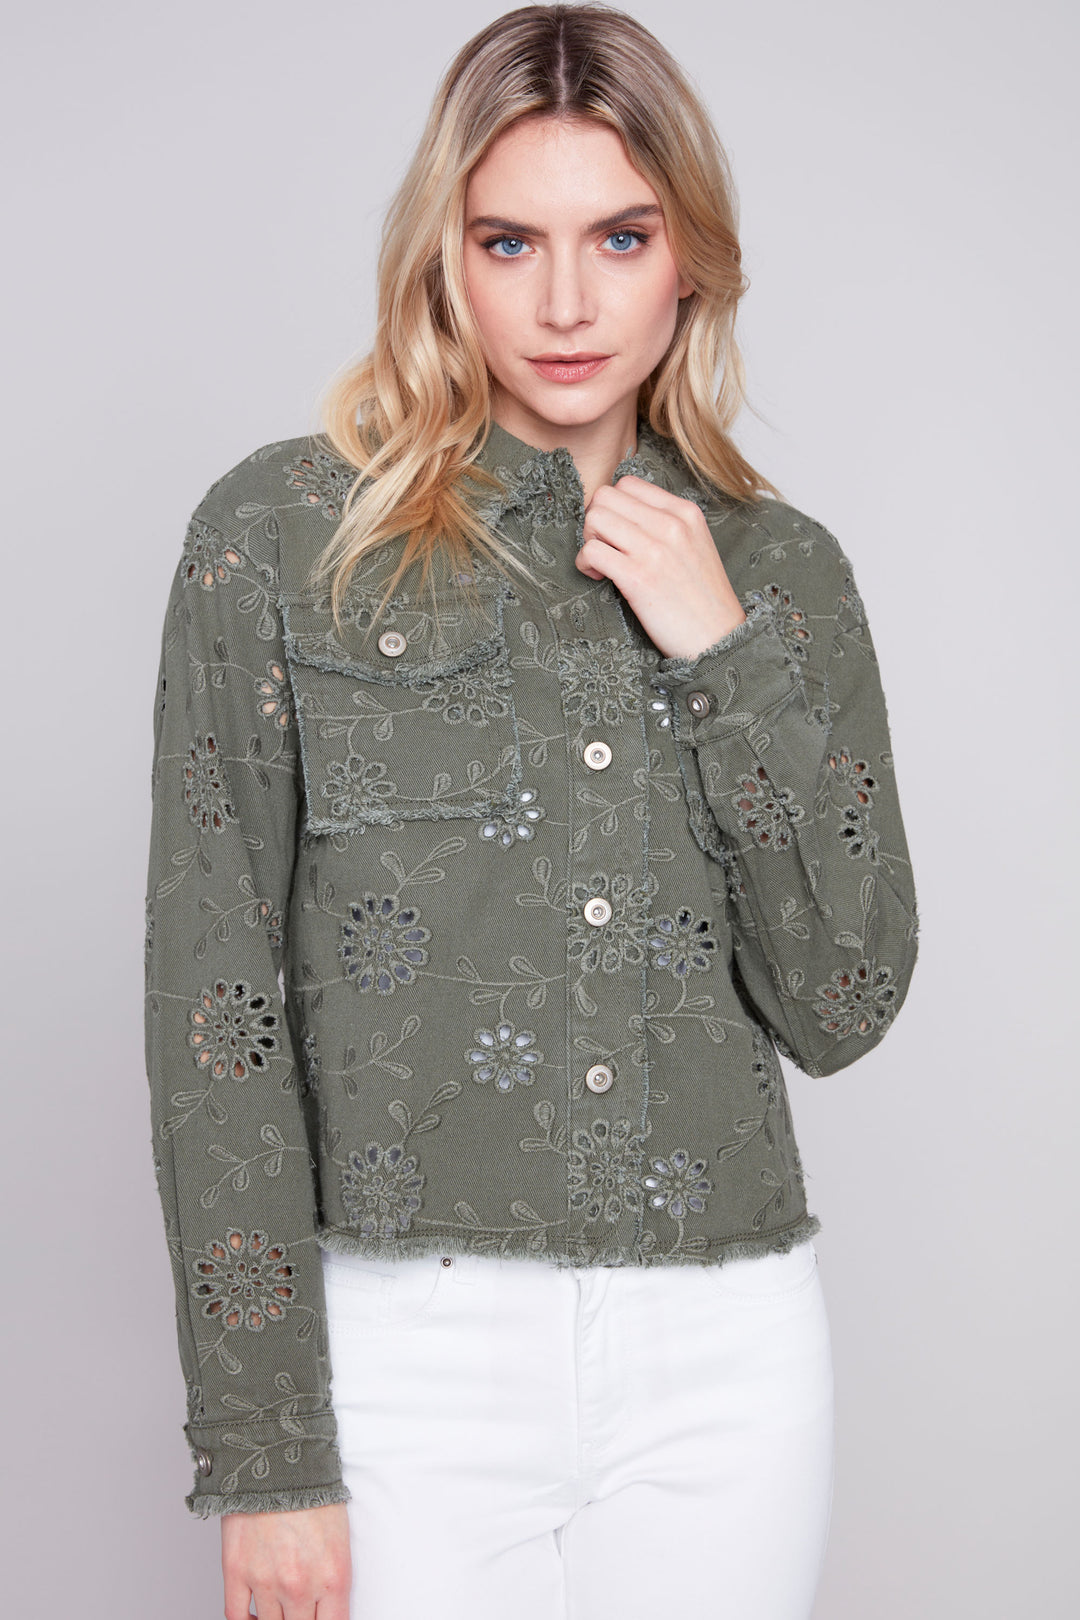 Featuring a stunning embroidered eyelet design, this all cotton jean jacket exudes sophistication and fun! 